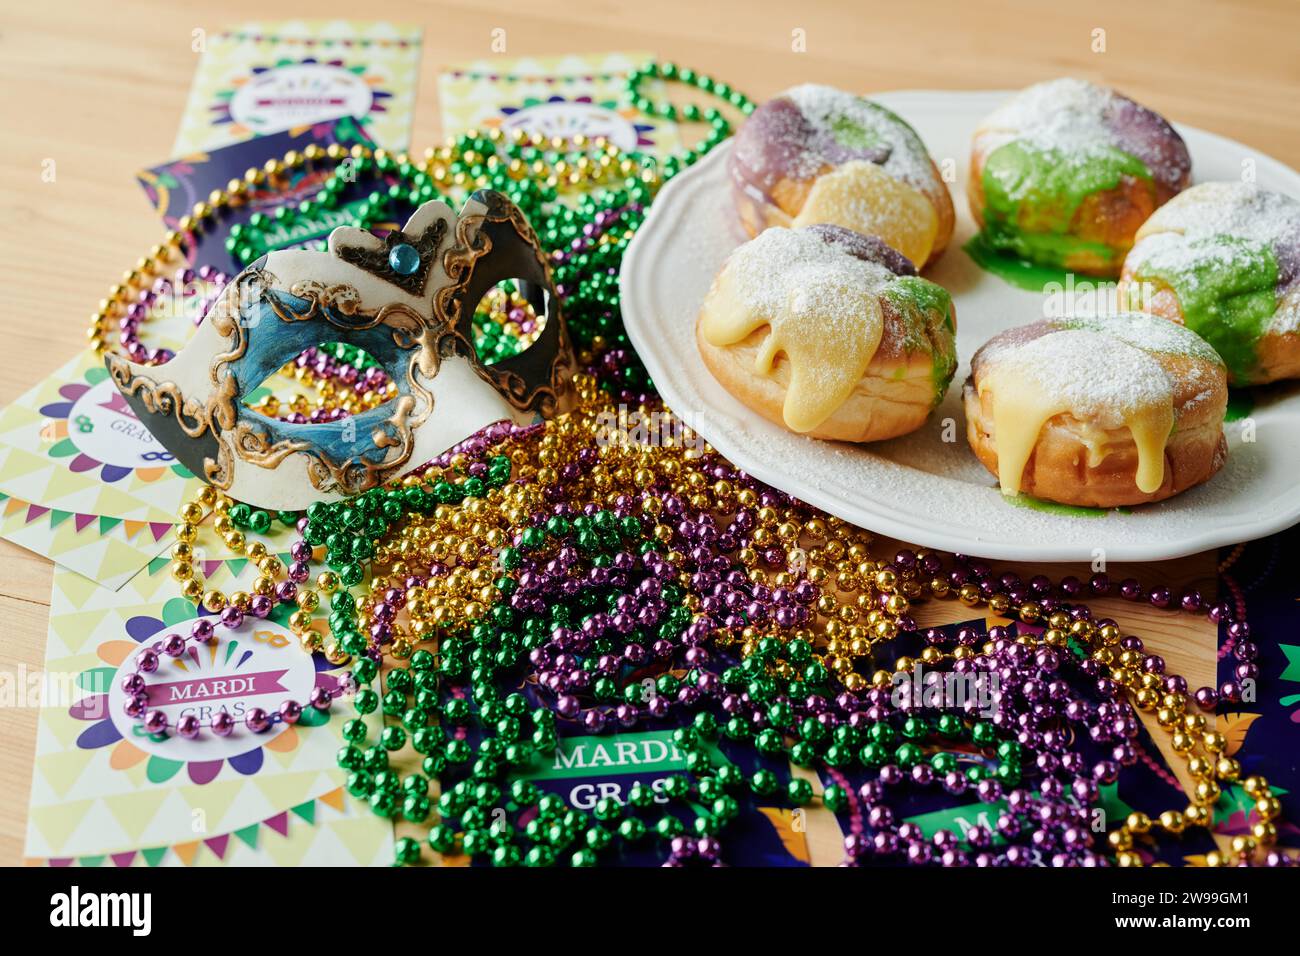 Group of Mardi Gras symbols such as postcards, venetian mask, colorful beads and appetizing homemade berliner donuts on table Stock Photo